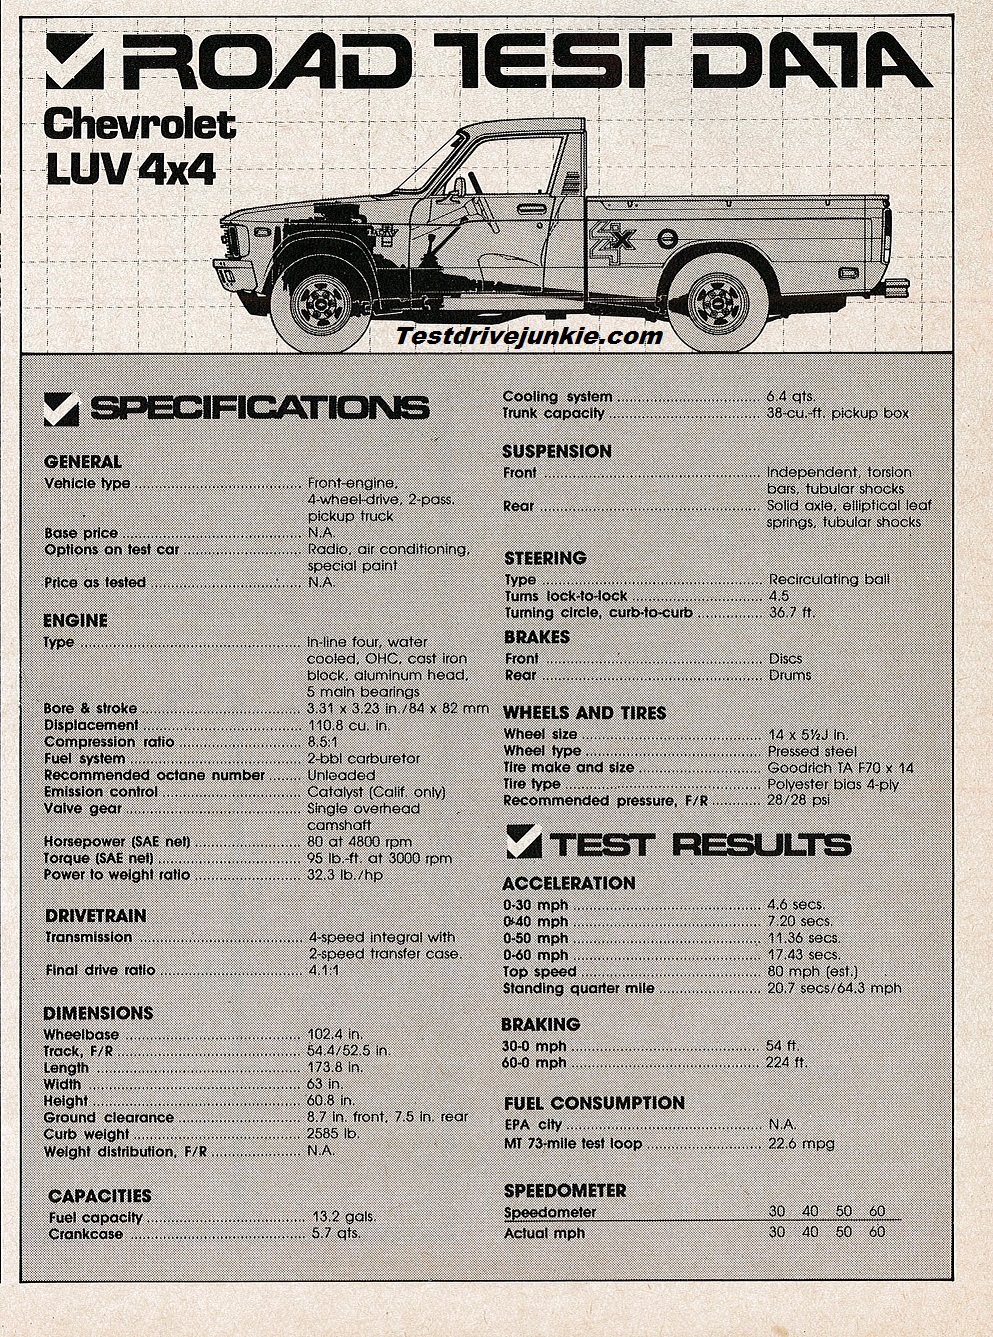 1979 Chevrolet LUV 4x4 (USA), The 4x4 was a new model for 1…